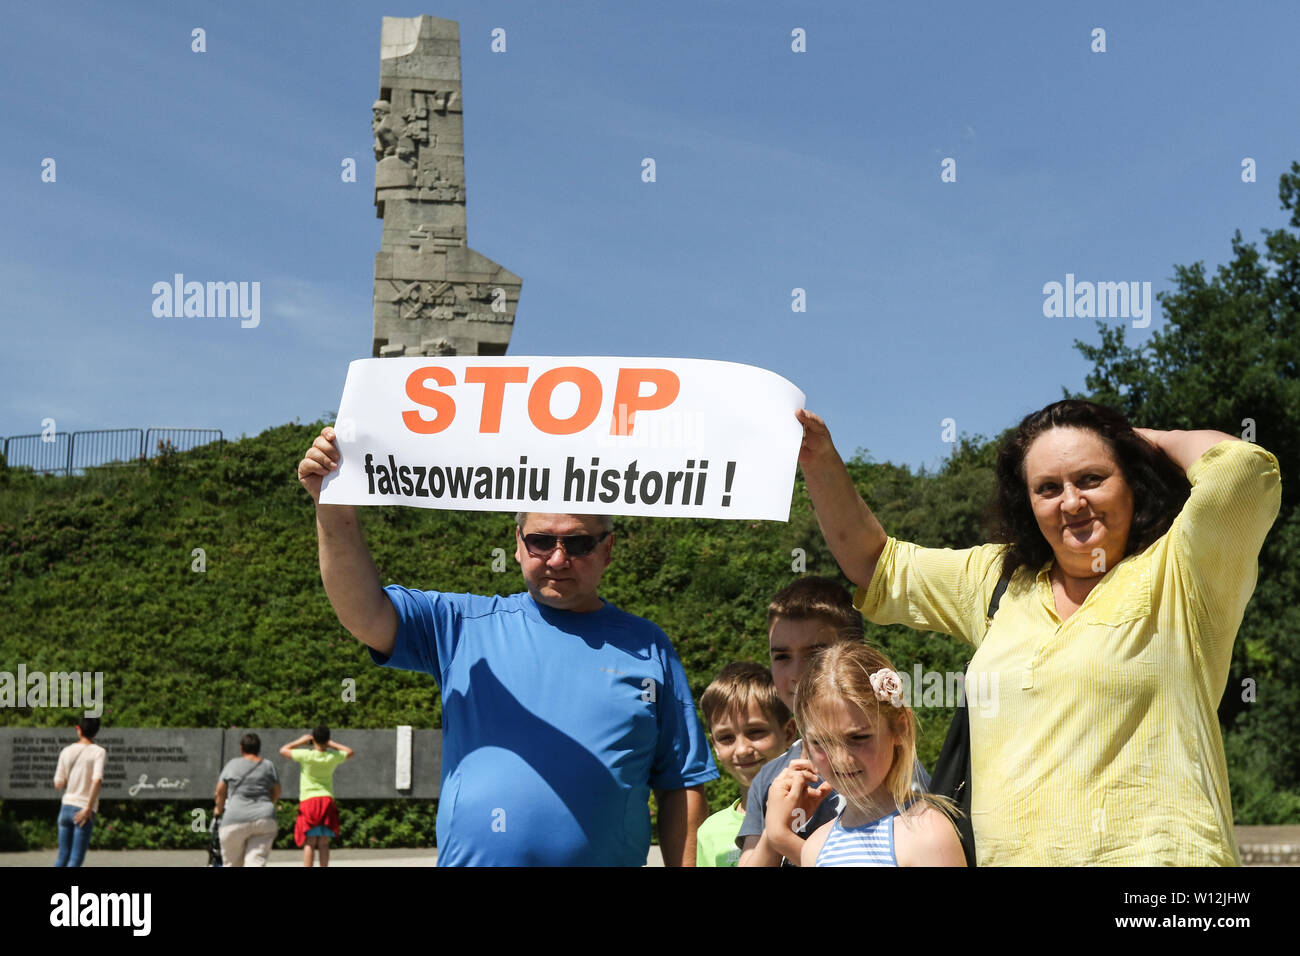 Gdansk, Poland. 29th, June 2019  People and Gdansk city authorities protest against government plans to expropriation for political purposes and the acquisition by a special law the Westerplatte Peninsula. Westerplatte is the first battlefield of the WWII. Protesters holding banners that speak -  Stop to falsification of history are seen © Vadim Pacajev / Alamy Live News Stock Photo